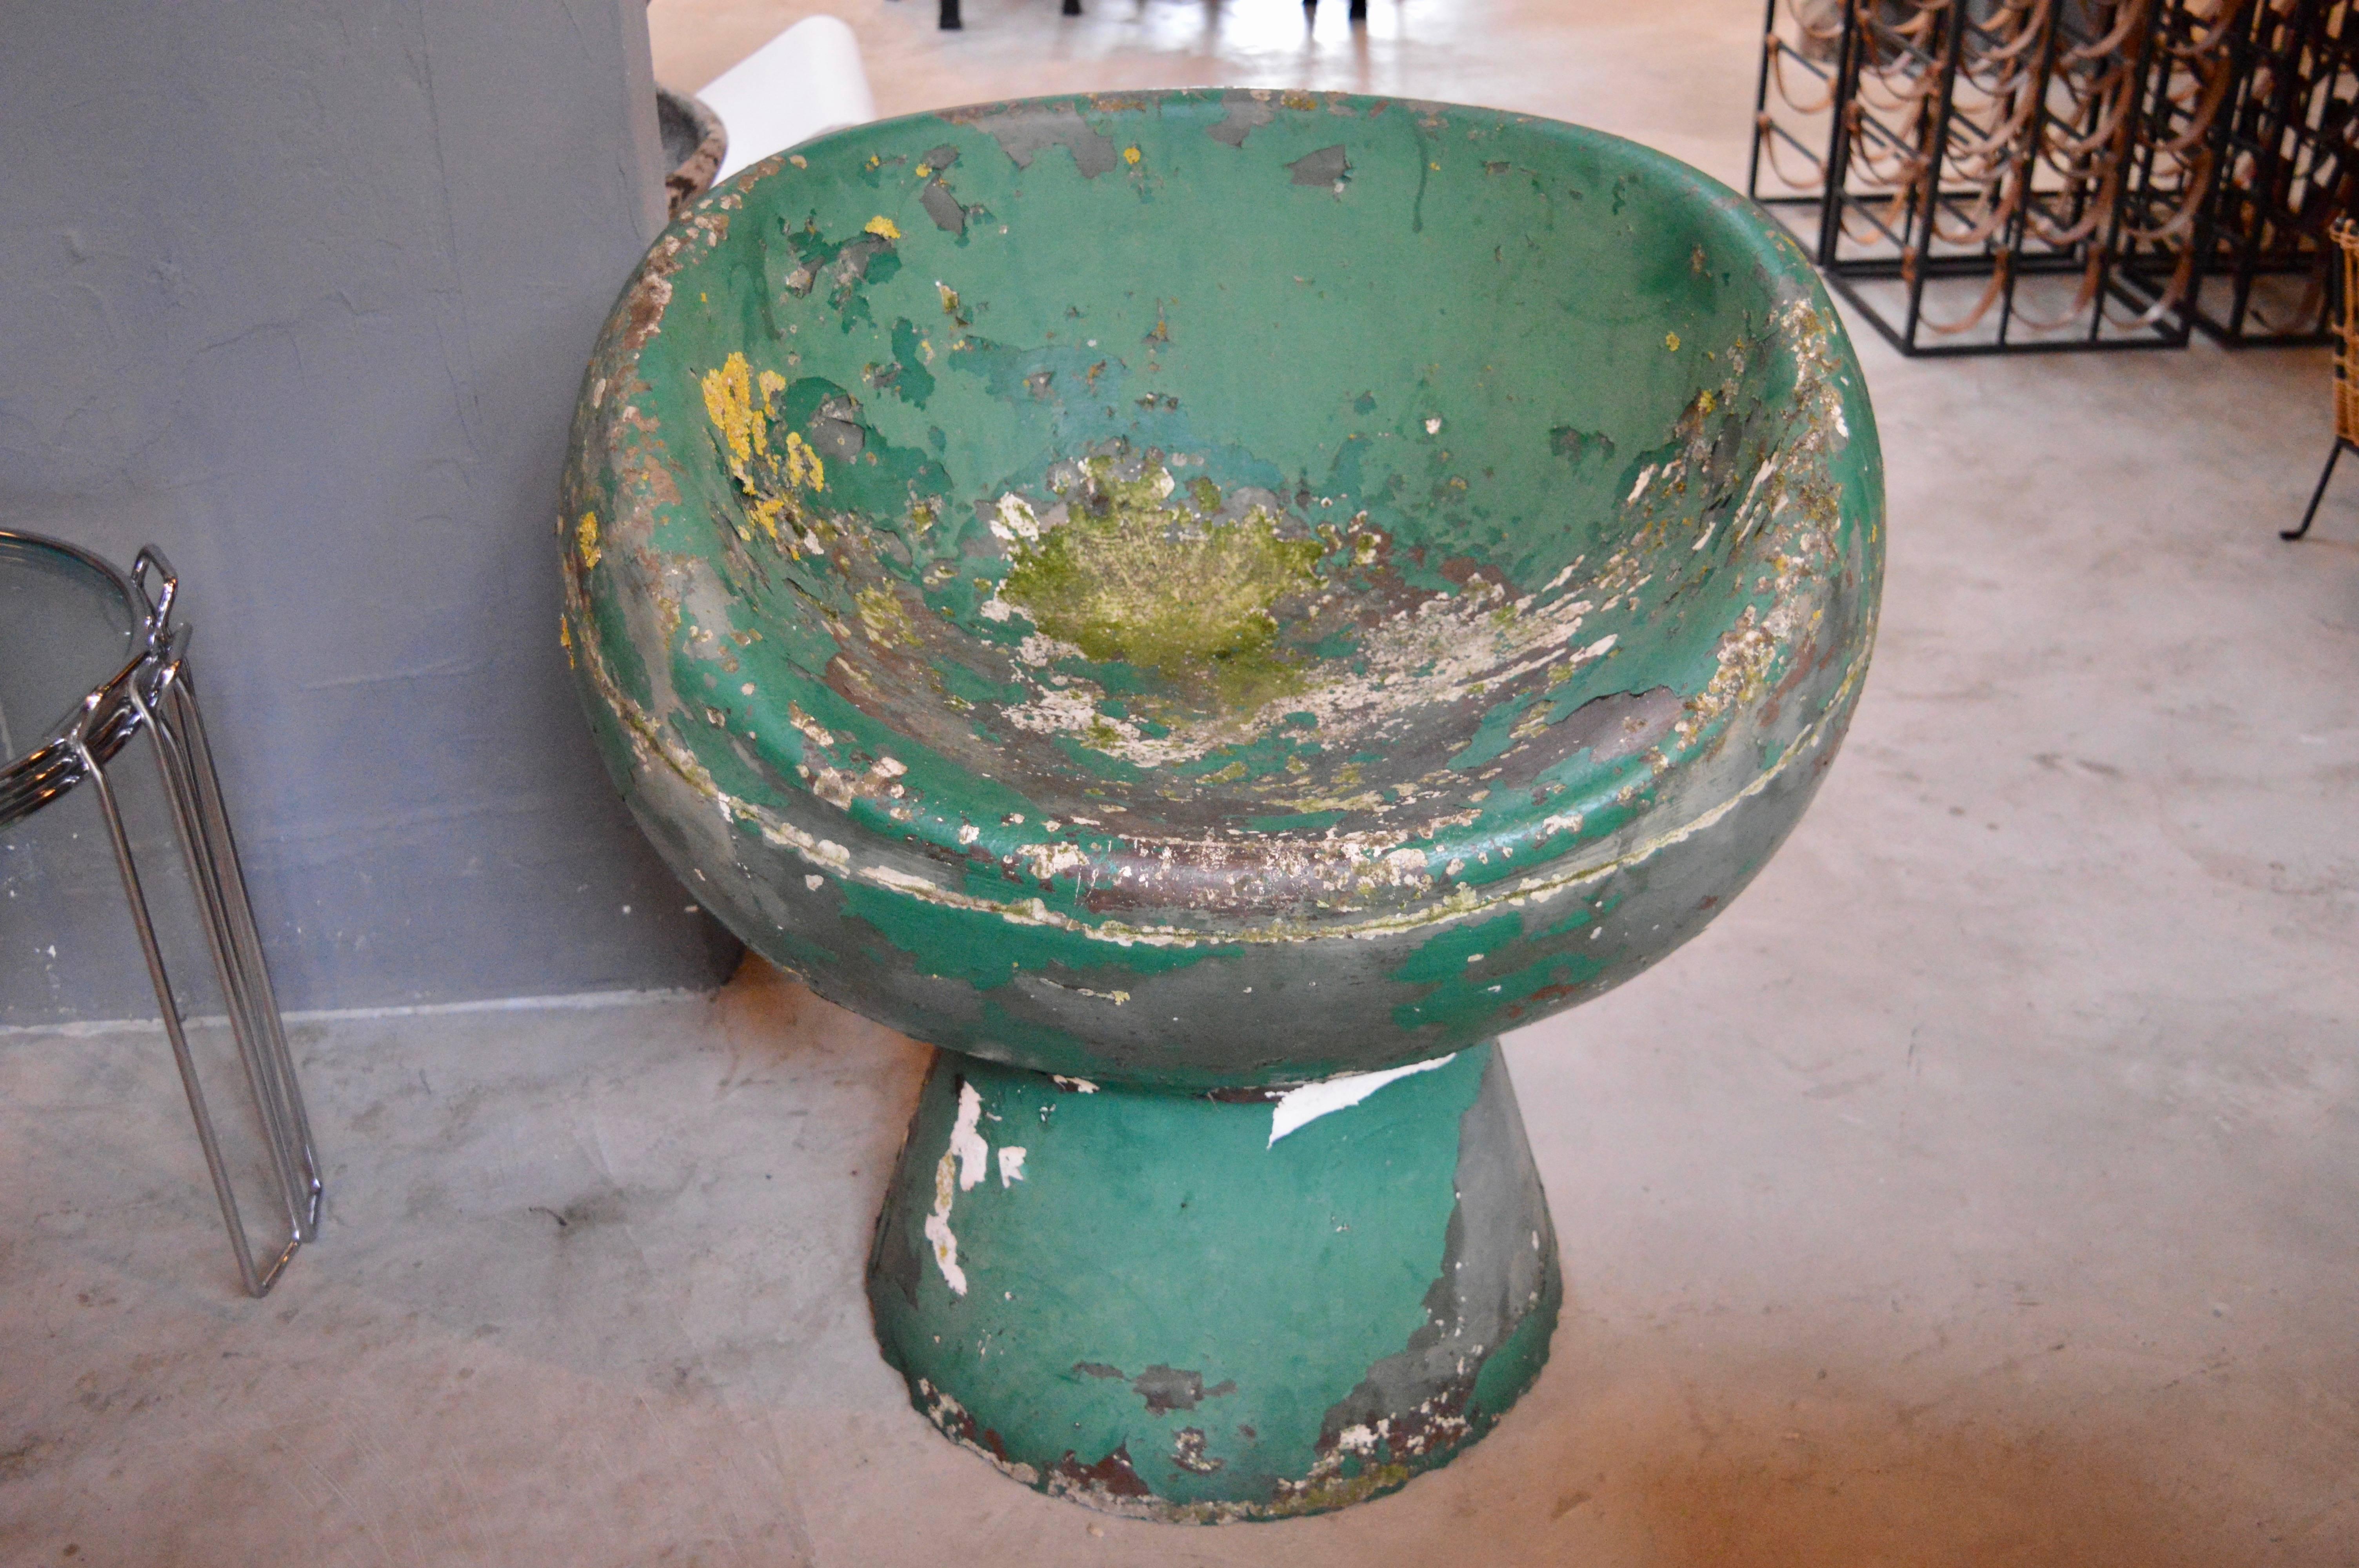 Stunning green concrete mushroom chair by Swiss Architect Willy Guhl.  60 plus years of patina. Made for Eternit in the 1960s. Amazing patina and condition. Perfect indoors or outside! 

 Over a 150 Willy Guhl pieces available in our other listings.
